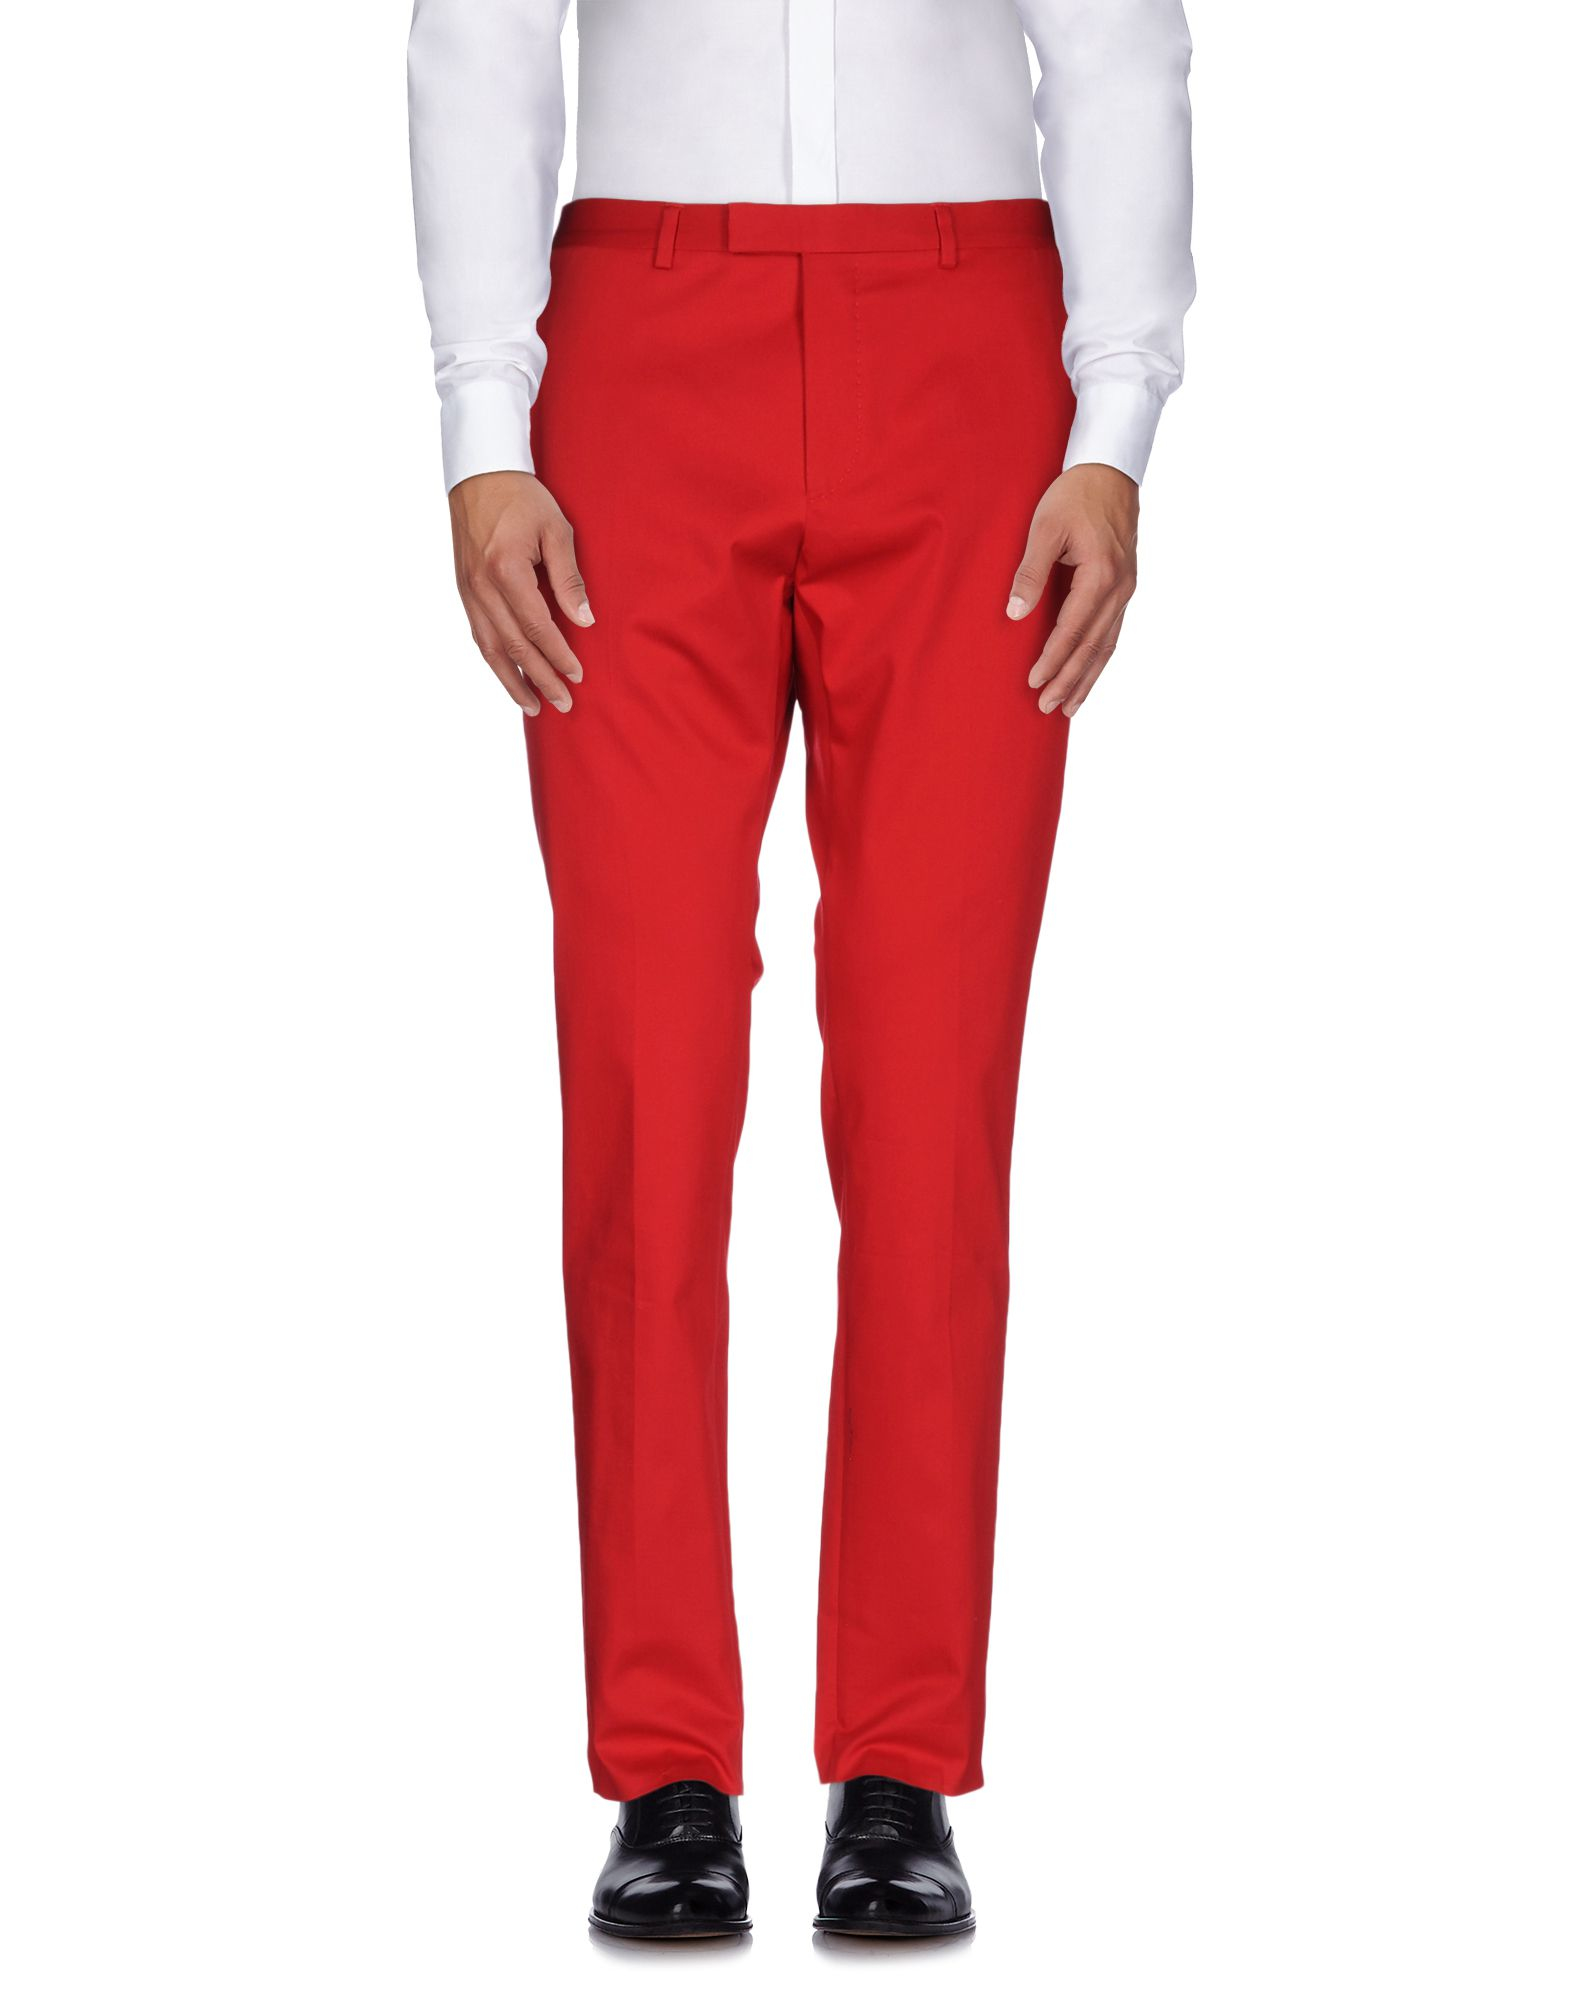 Gucci Casual Trouser in Red for Men - Lyst